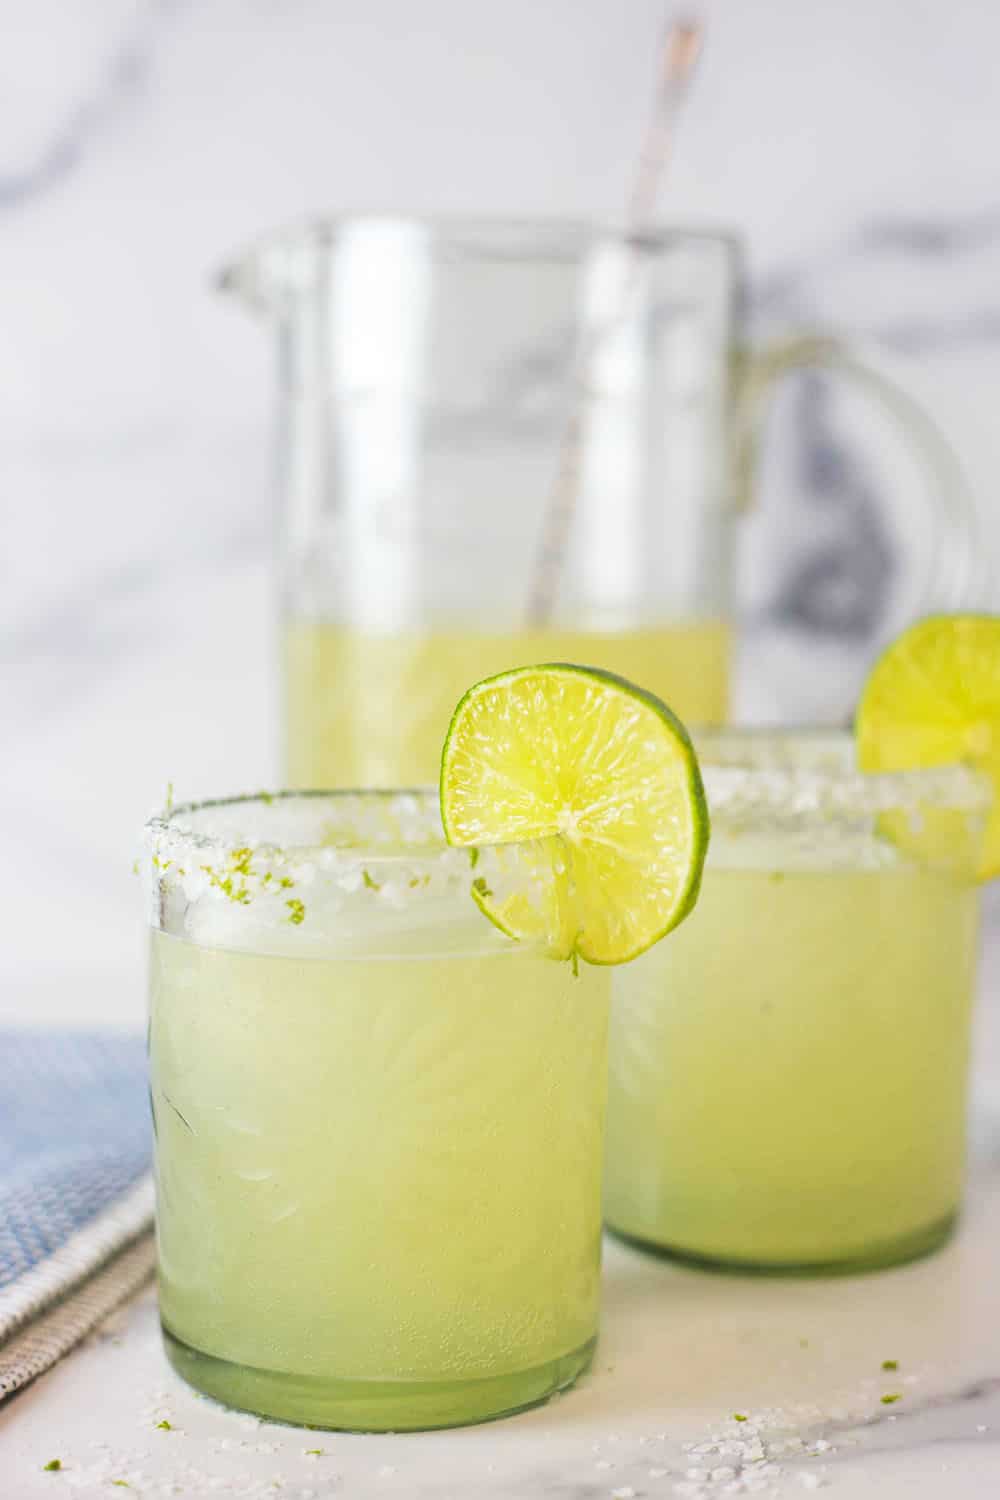 https://artzyfoodie.com/wp-content/uploads/2020/07/Extra-Skinny-Margaritas-by-the-Pitcher-9-copy.jpg